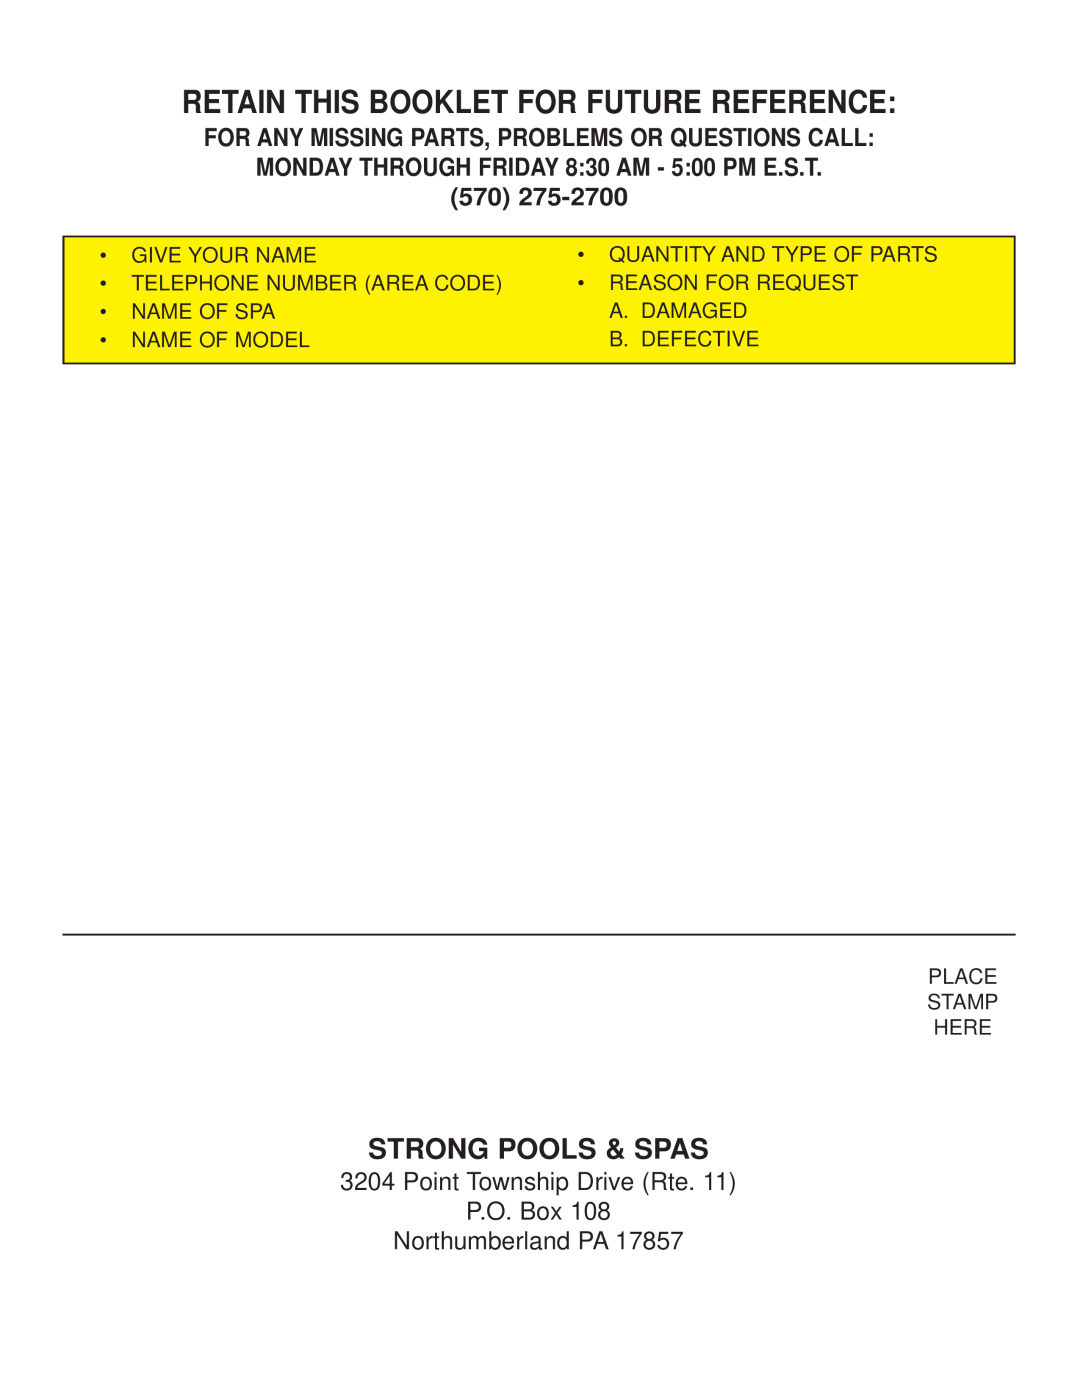 Strong Pools and Spas Strong Spas The Antigua owner manual Retain This Booklet For Future Reference, Strong Pools & Spas 